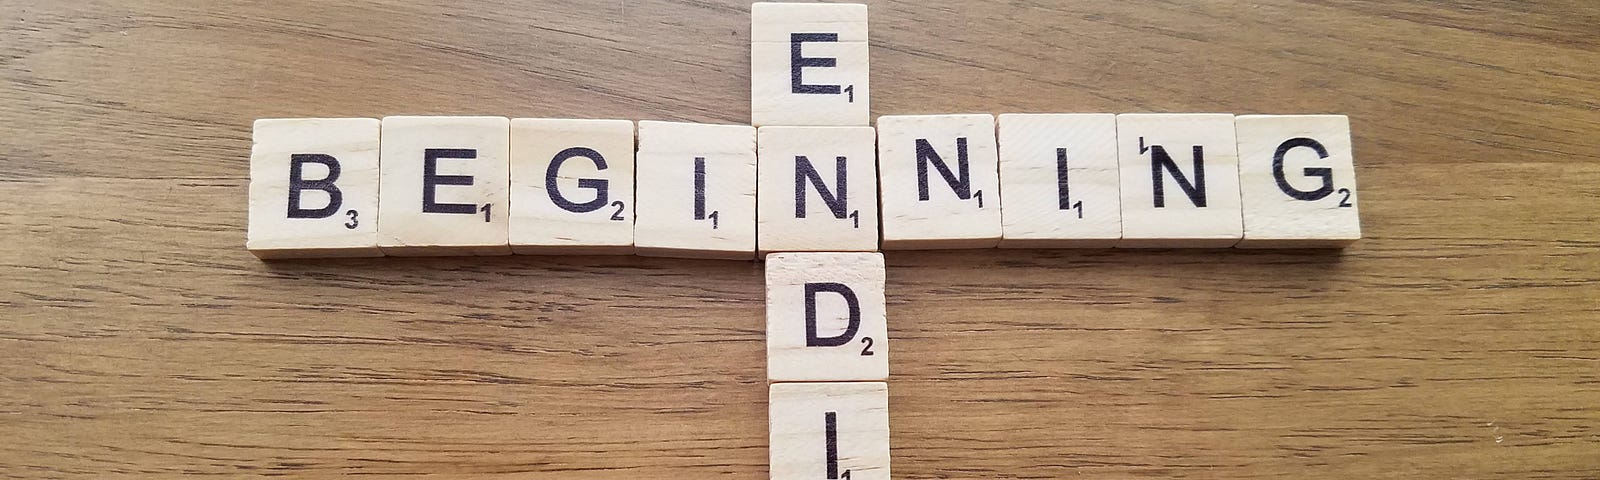 Wooden letters spelling out “beginning” (horizontally) and “ending” (vertically)